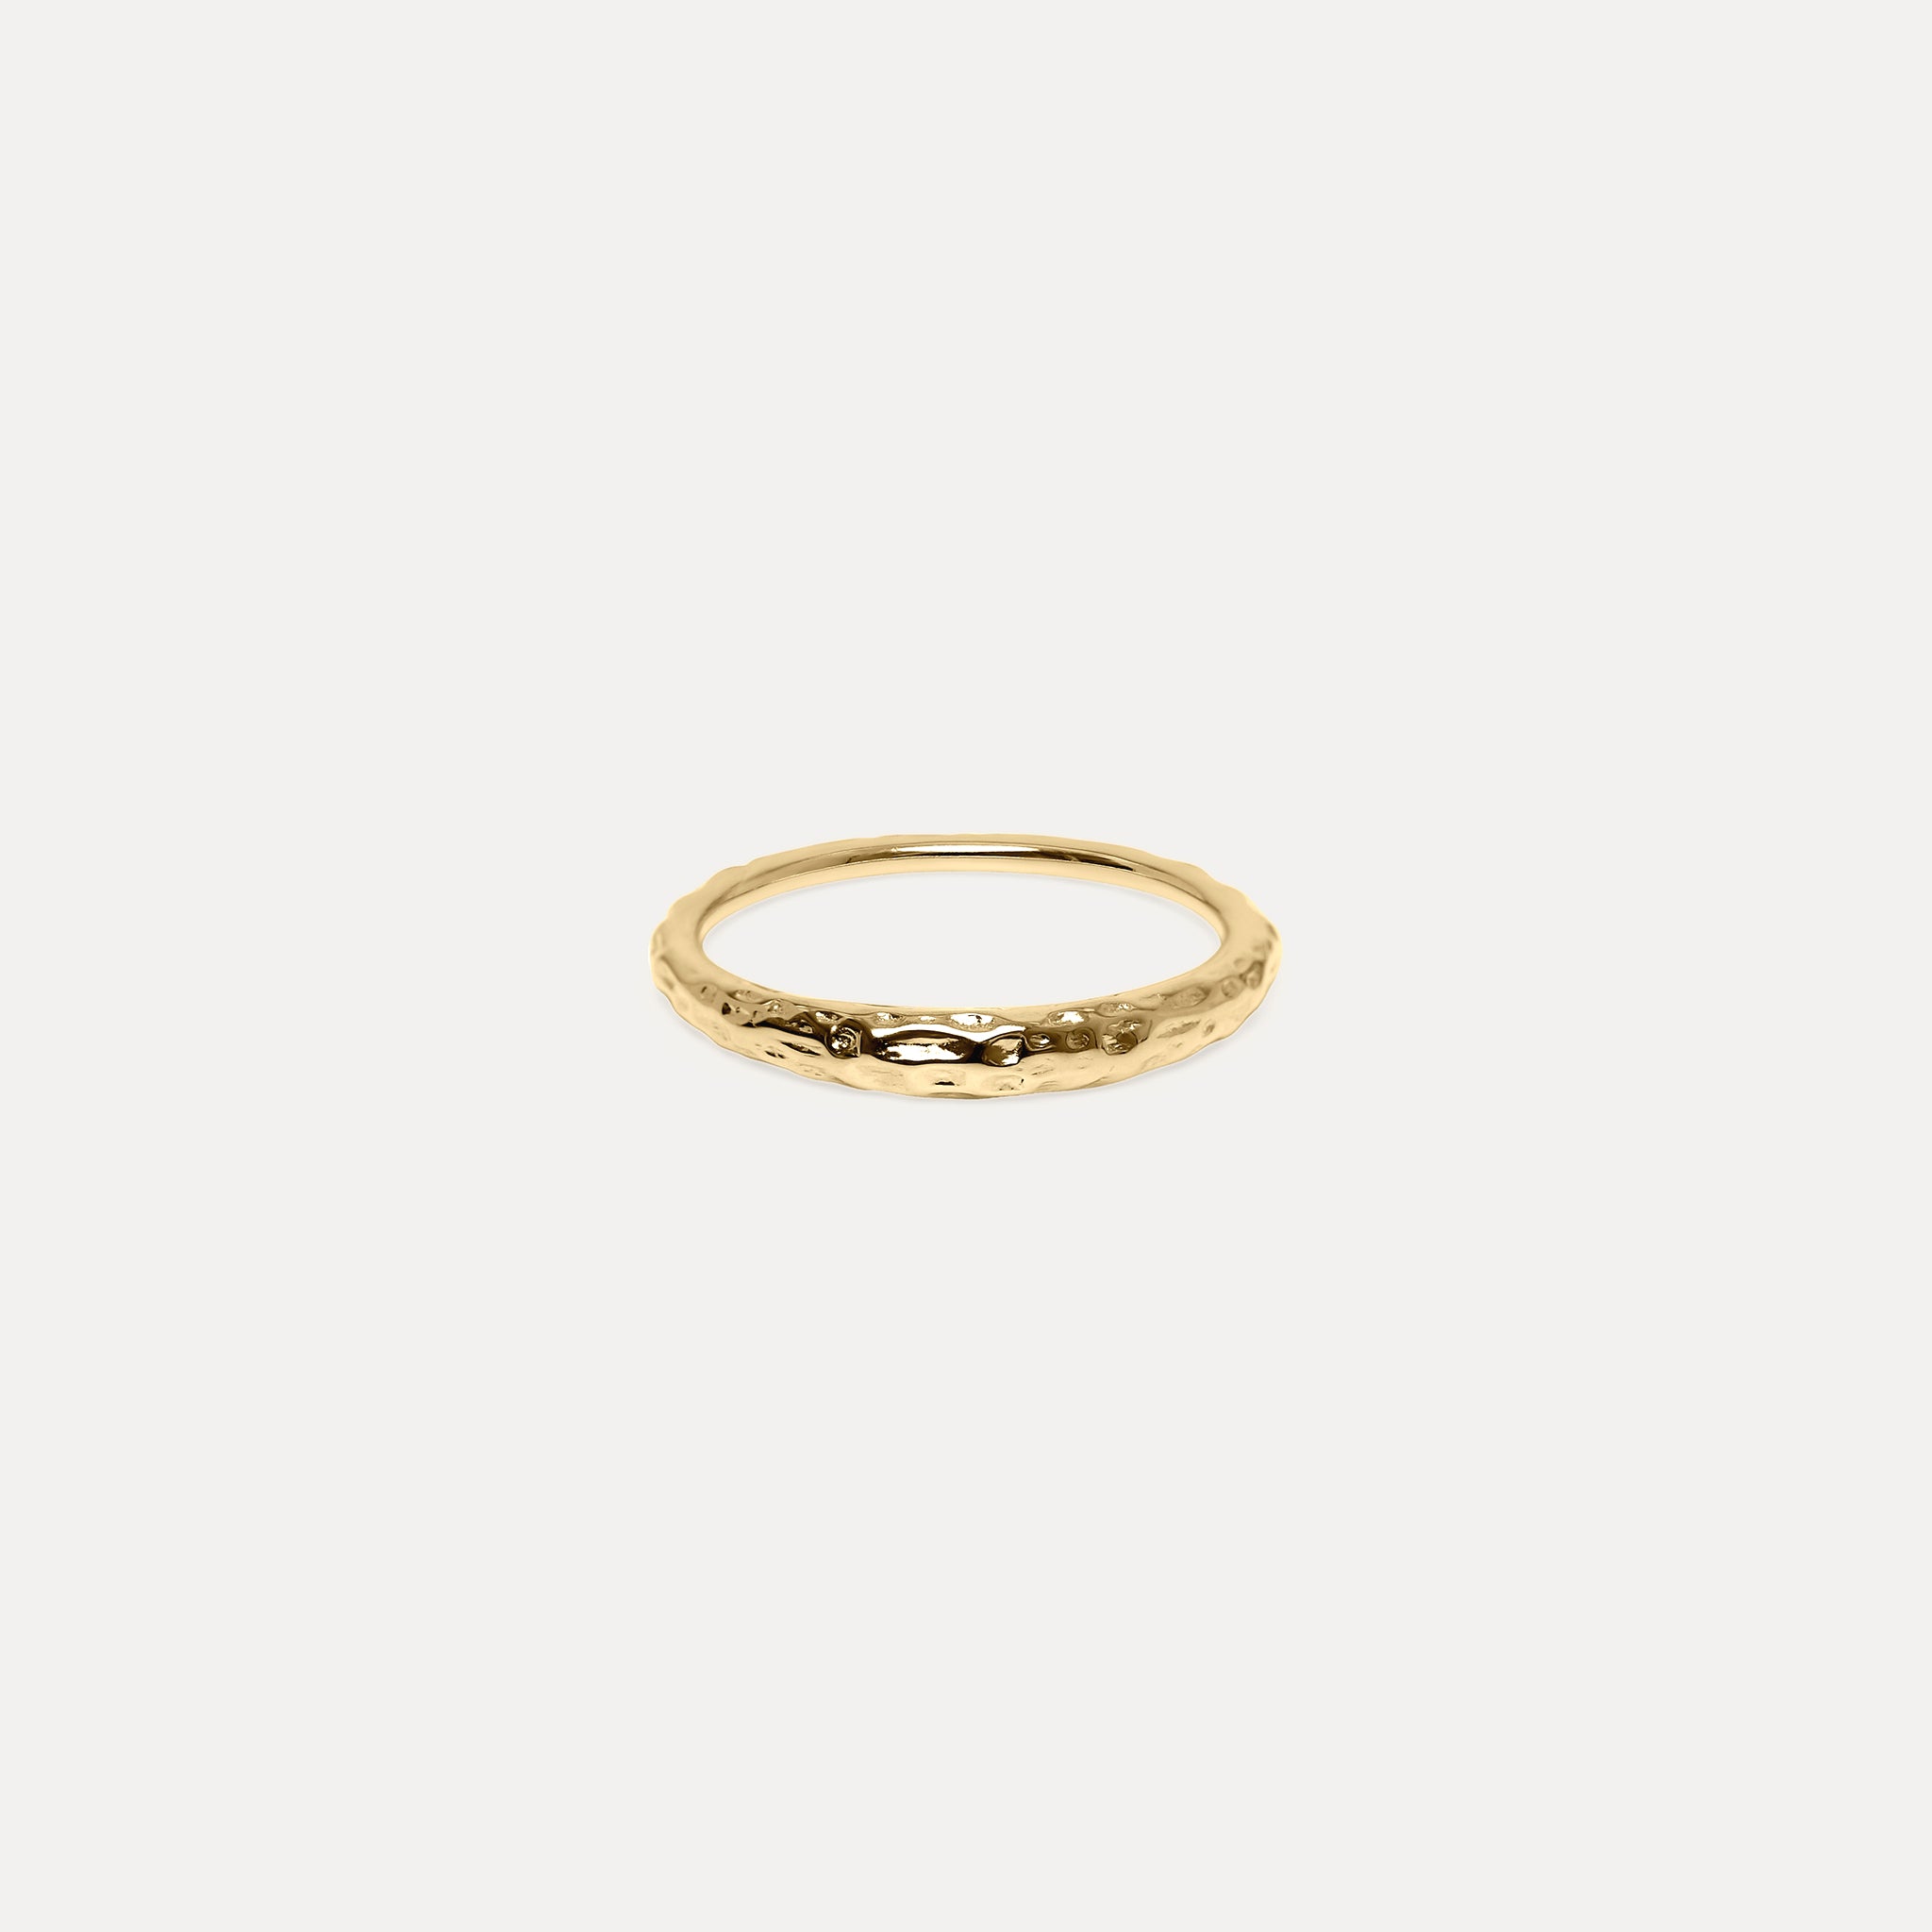 Hammered Thin Bombé Ring 14k Solid Gold